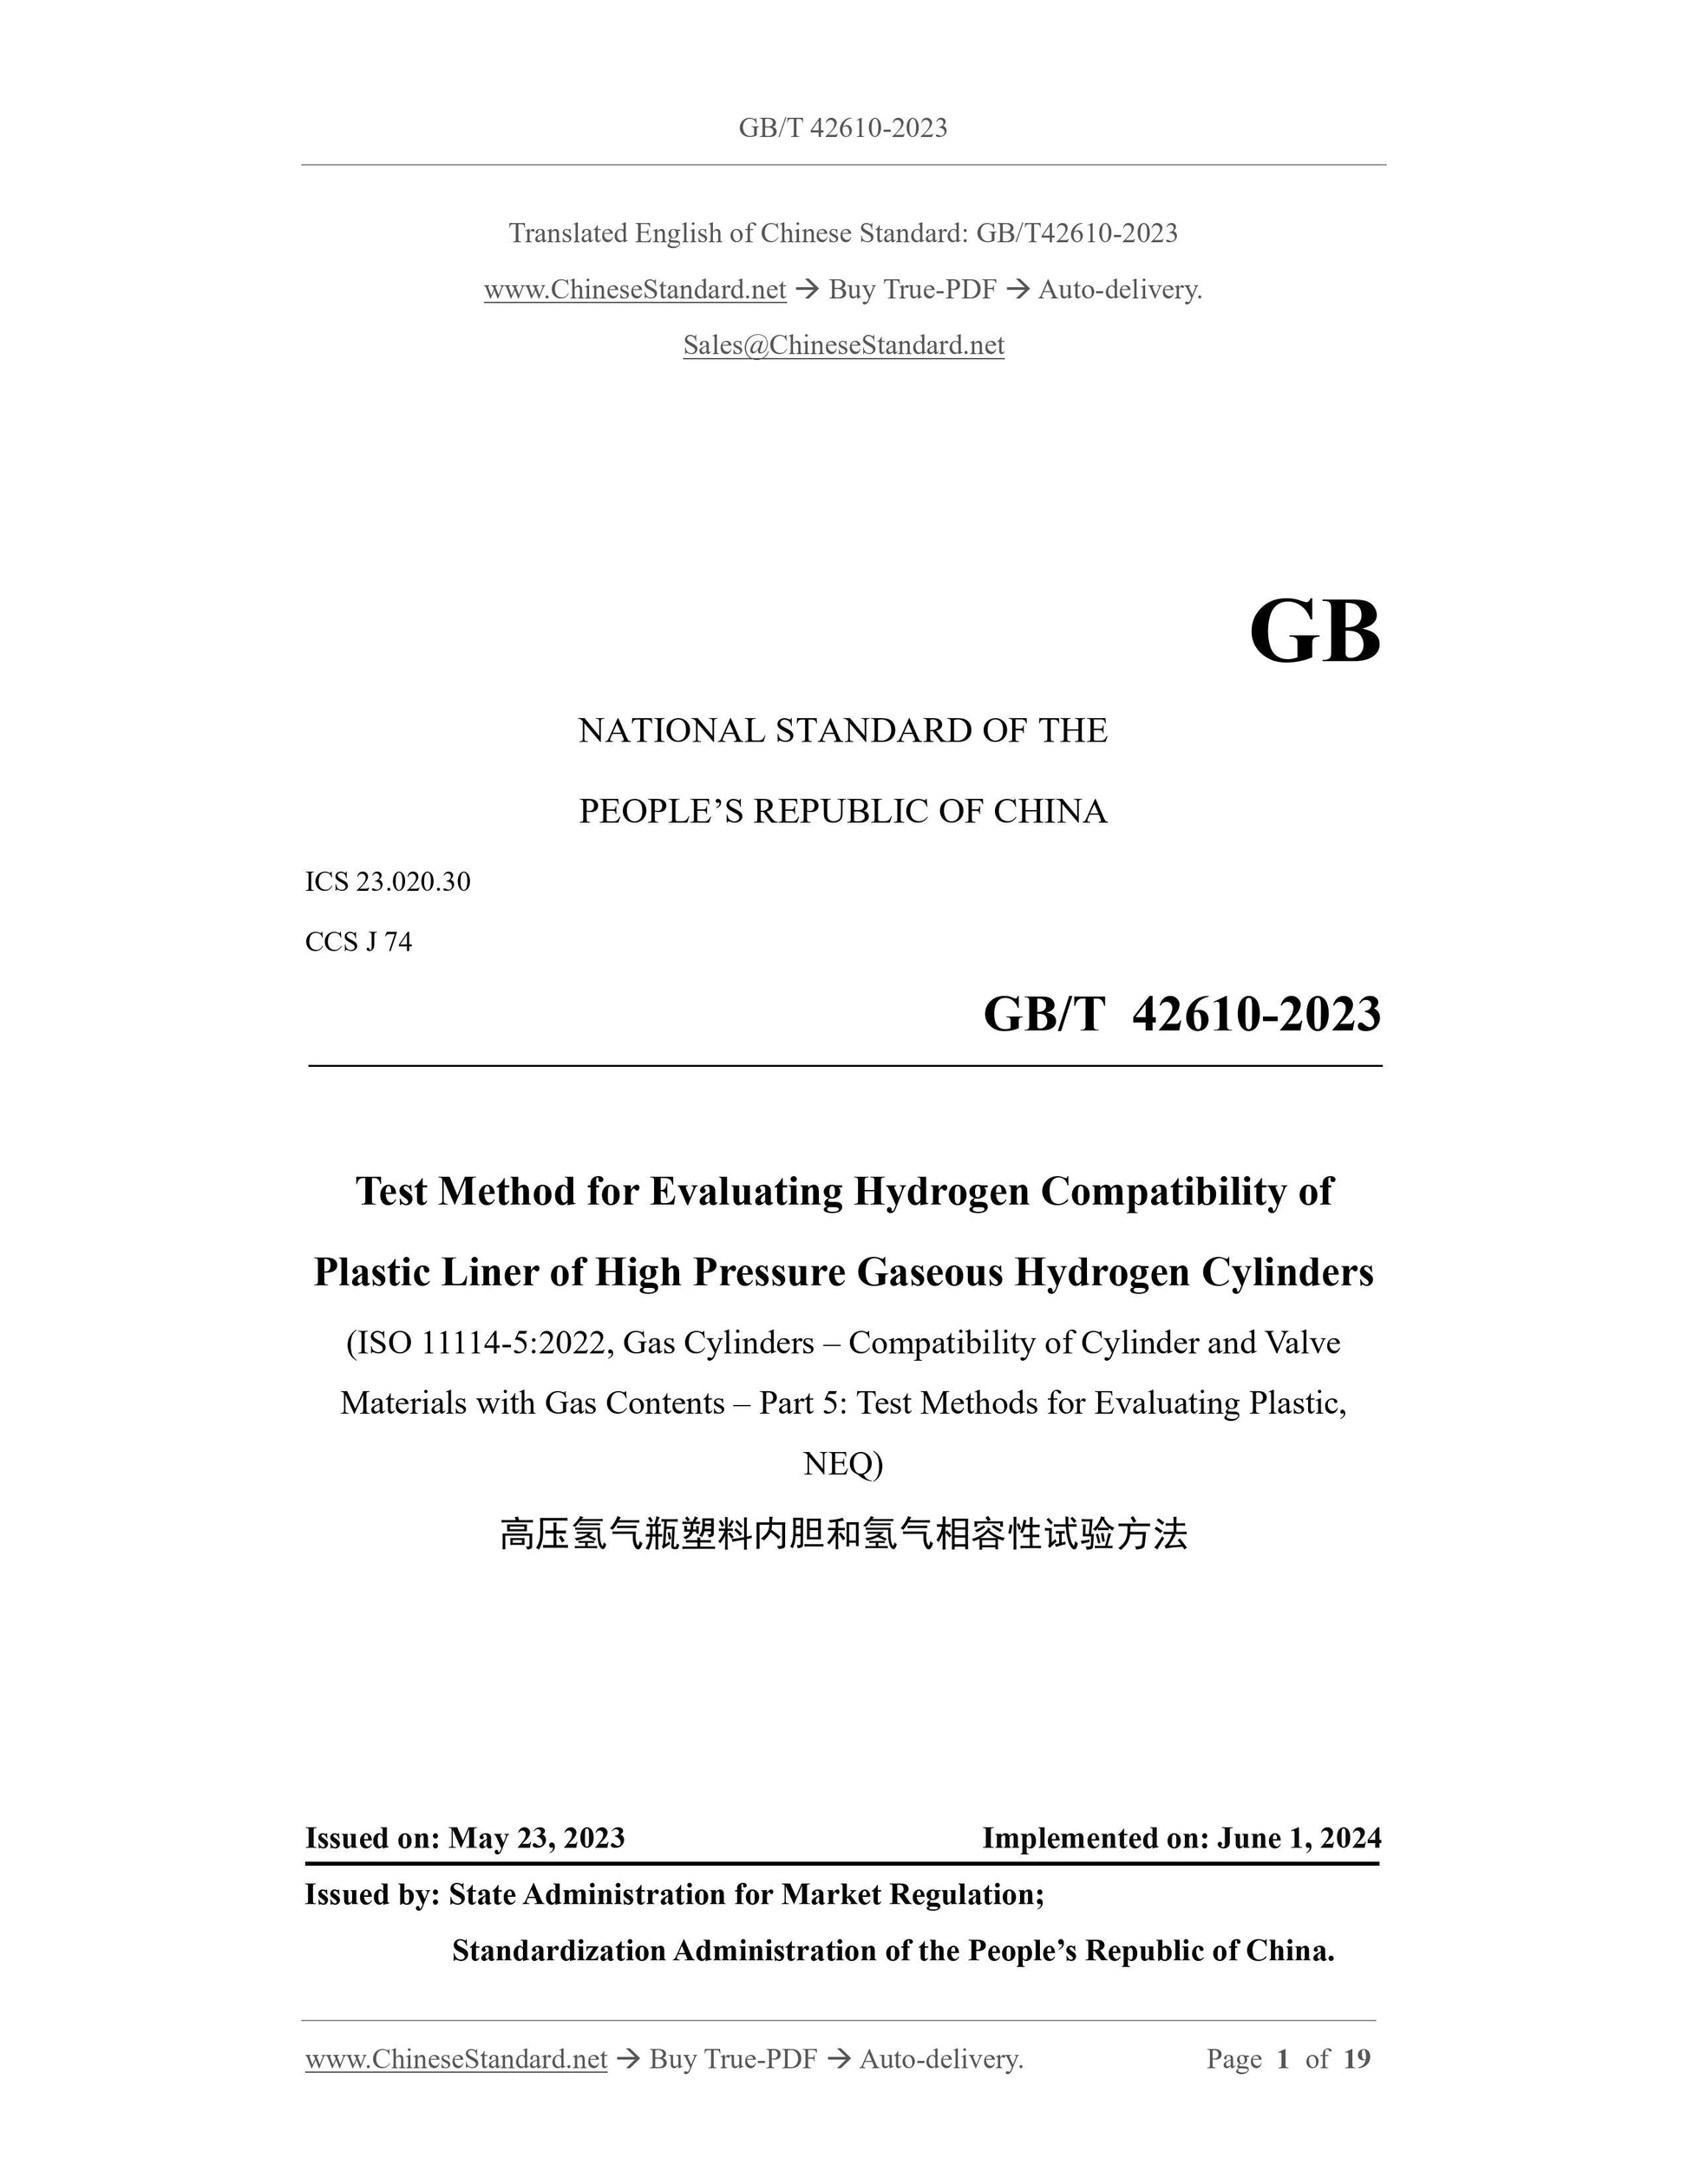 GB/T 42610-2023 Page 1